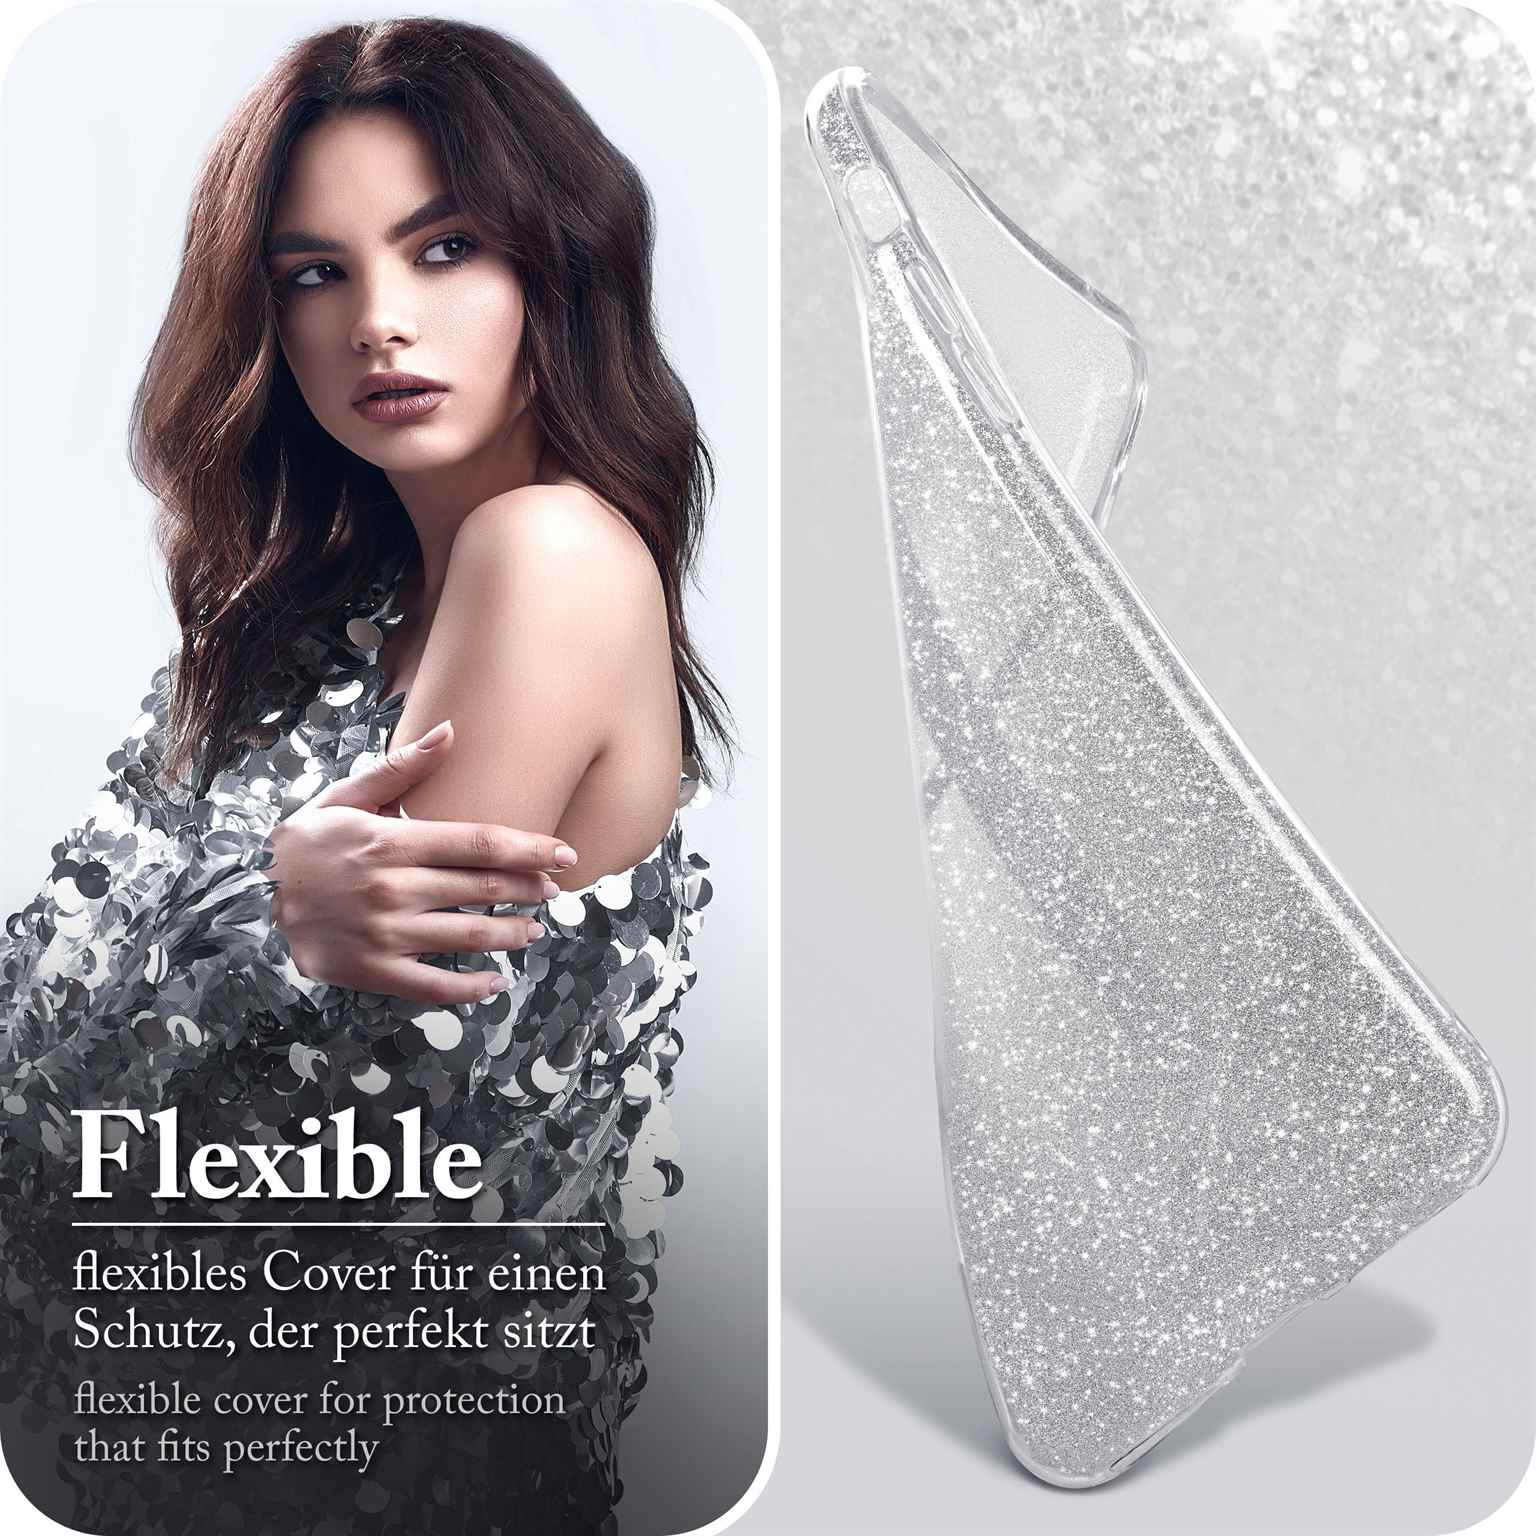 ONEFLOW Glitter Case, Backcover, Samsung, Galaxy - A71, Silver Sparkle